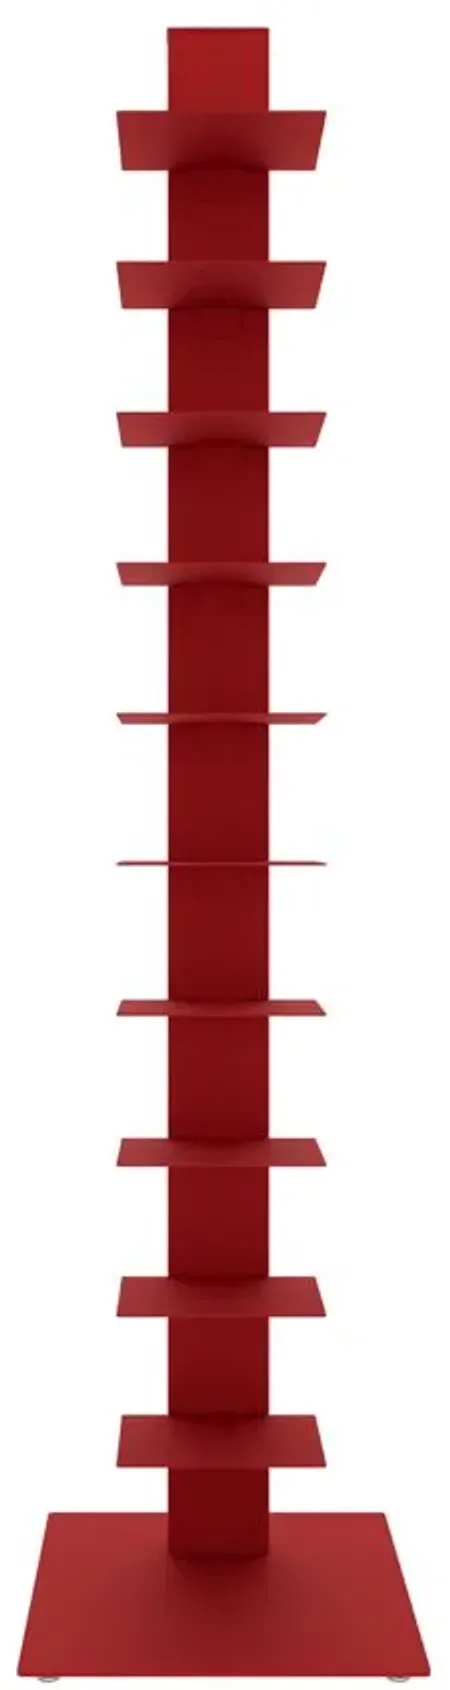 Sapiens 60" Bookcase Tower in Red by EuroStyle